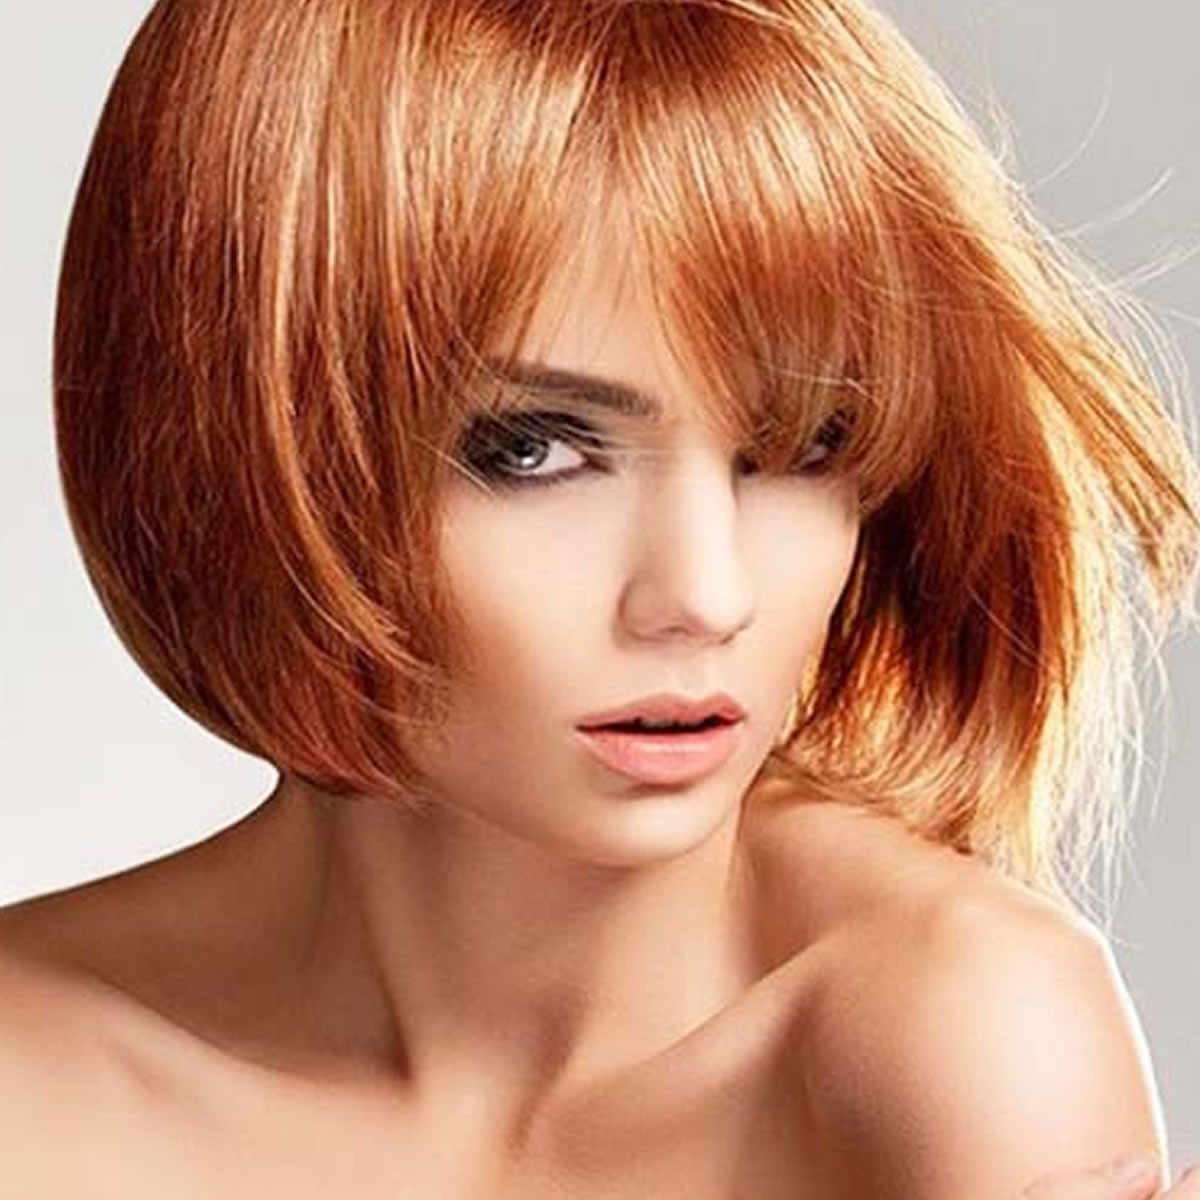 Hairstyles For Short Bob
 The Best 30 Short Bob Haircuts – 2018 Short Hairstyles for